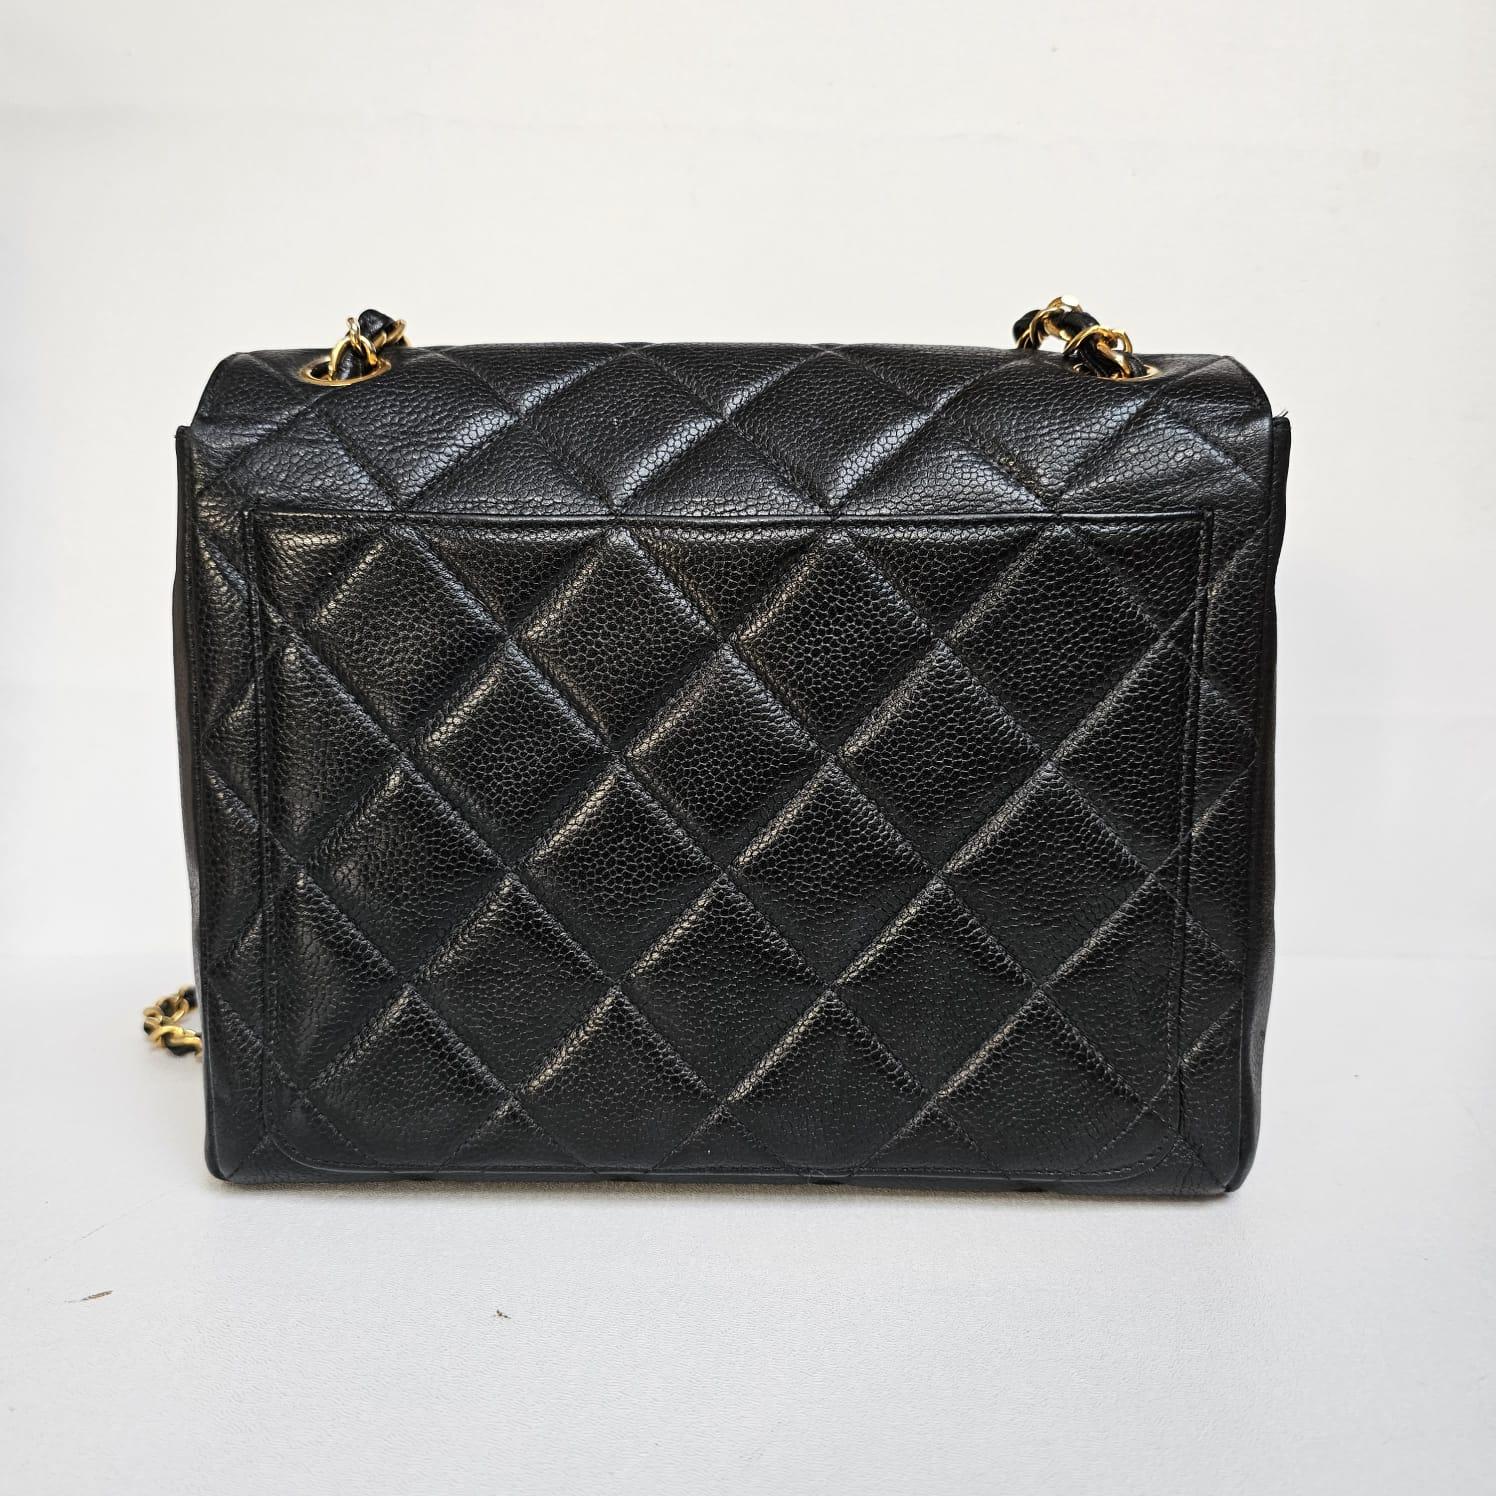 Vintage Chanel Black Caviar Quilted Square Flap Bag 9